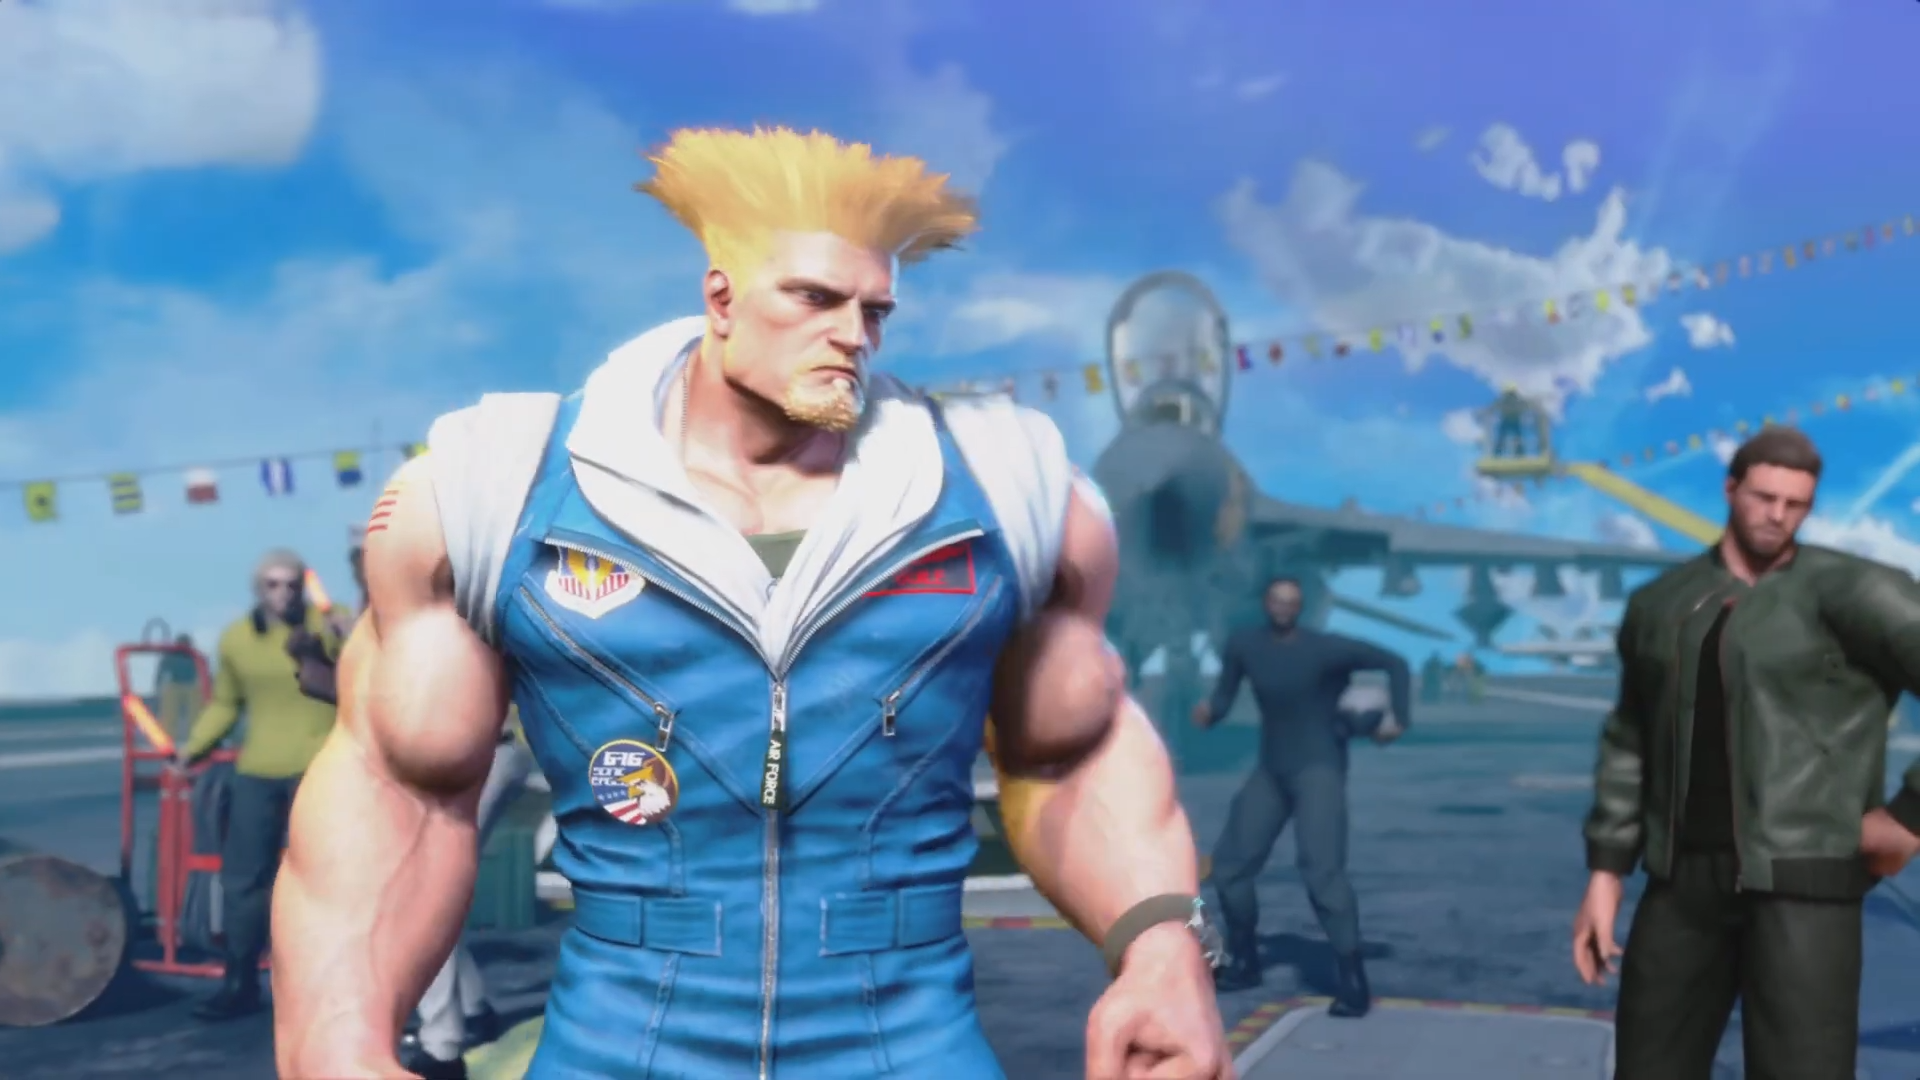 Street Fighter VI - Guile (S1) by WhiteMageSunny on DeviantArt